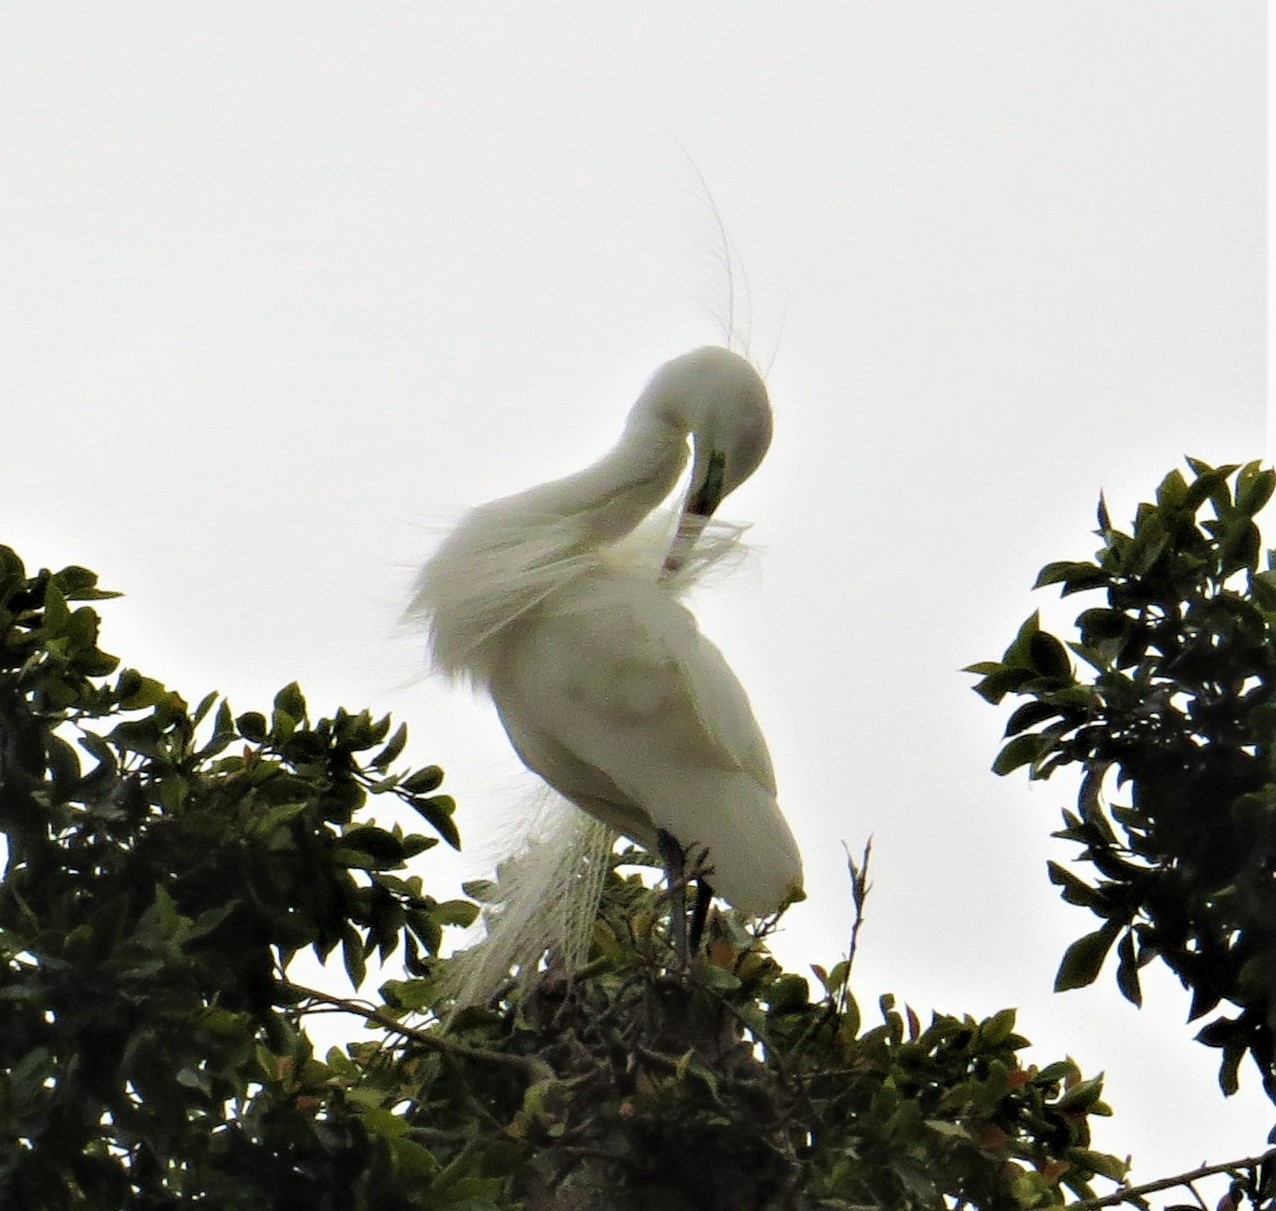 A white bird standing on a tree

Description automatically generated with medium confidence